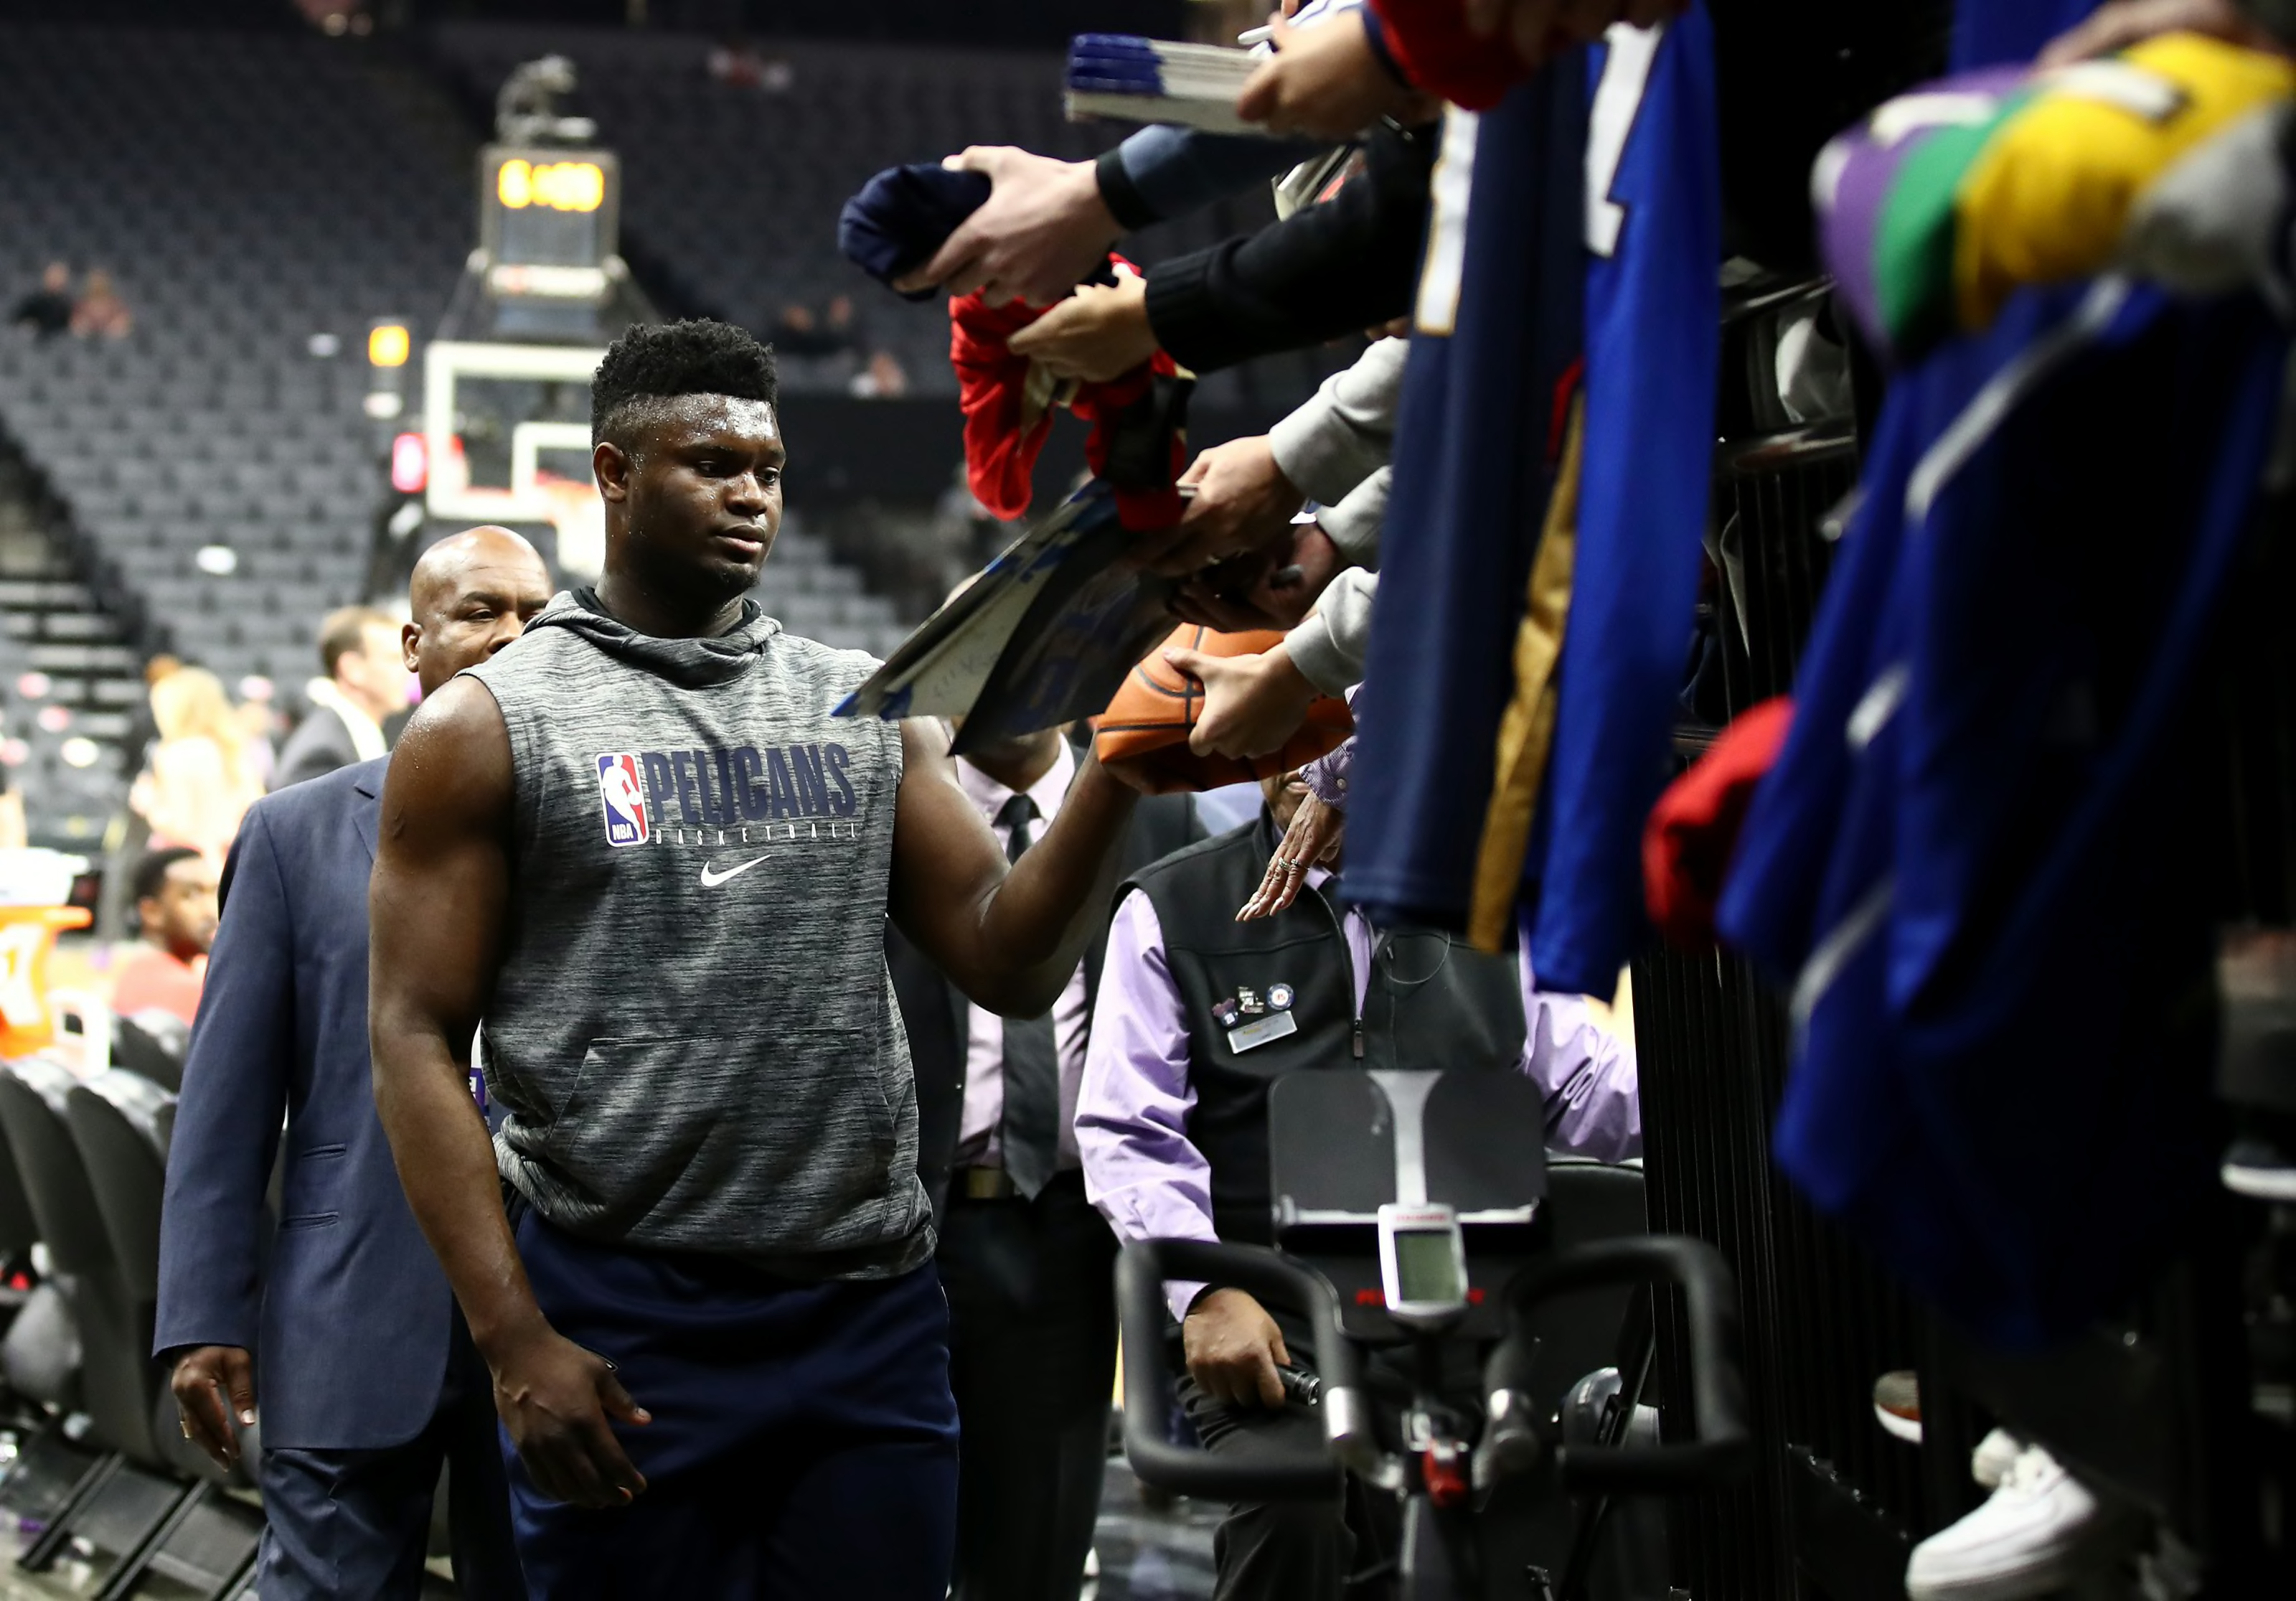 Zion Williamson makes first appearance in an NBA game since